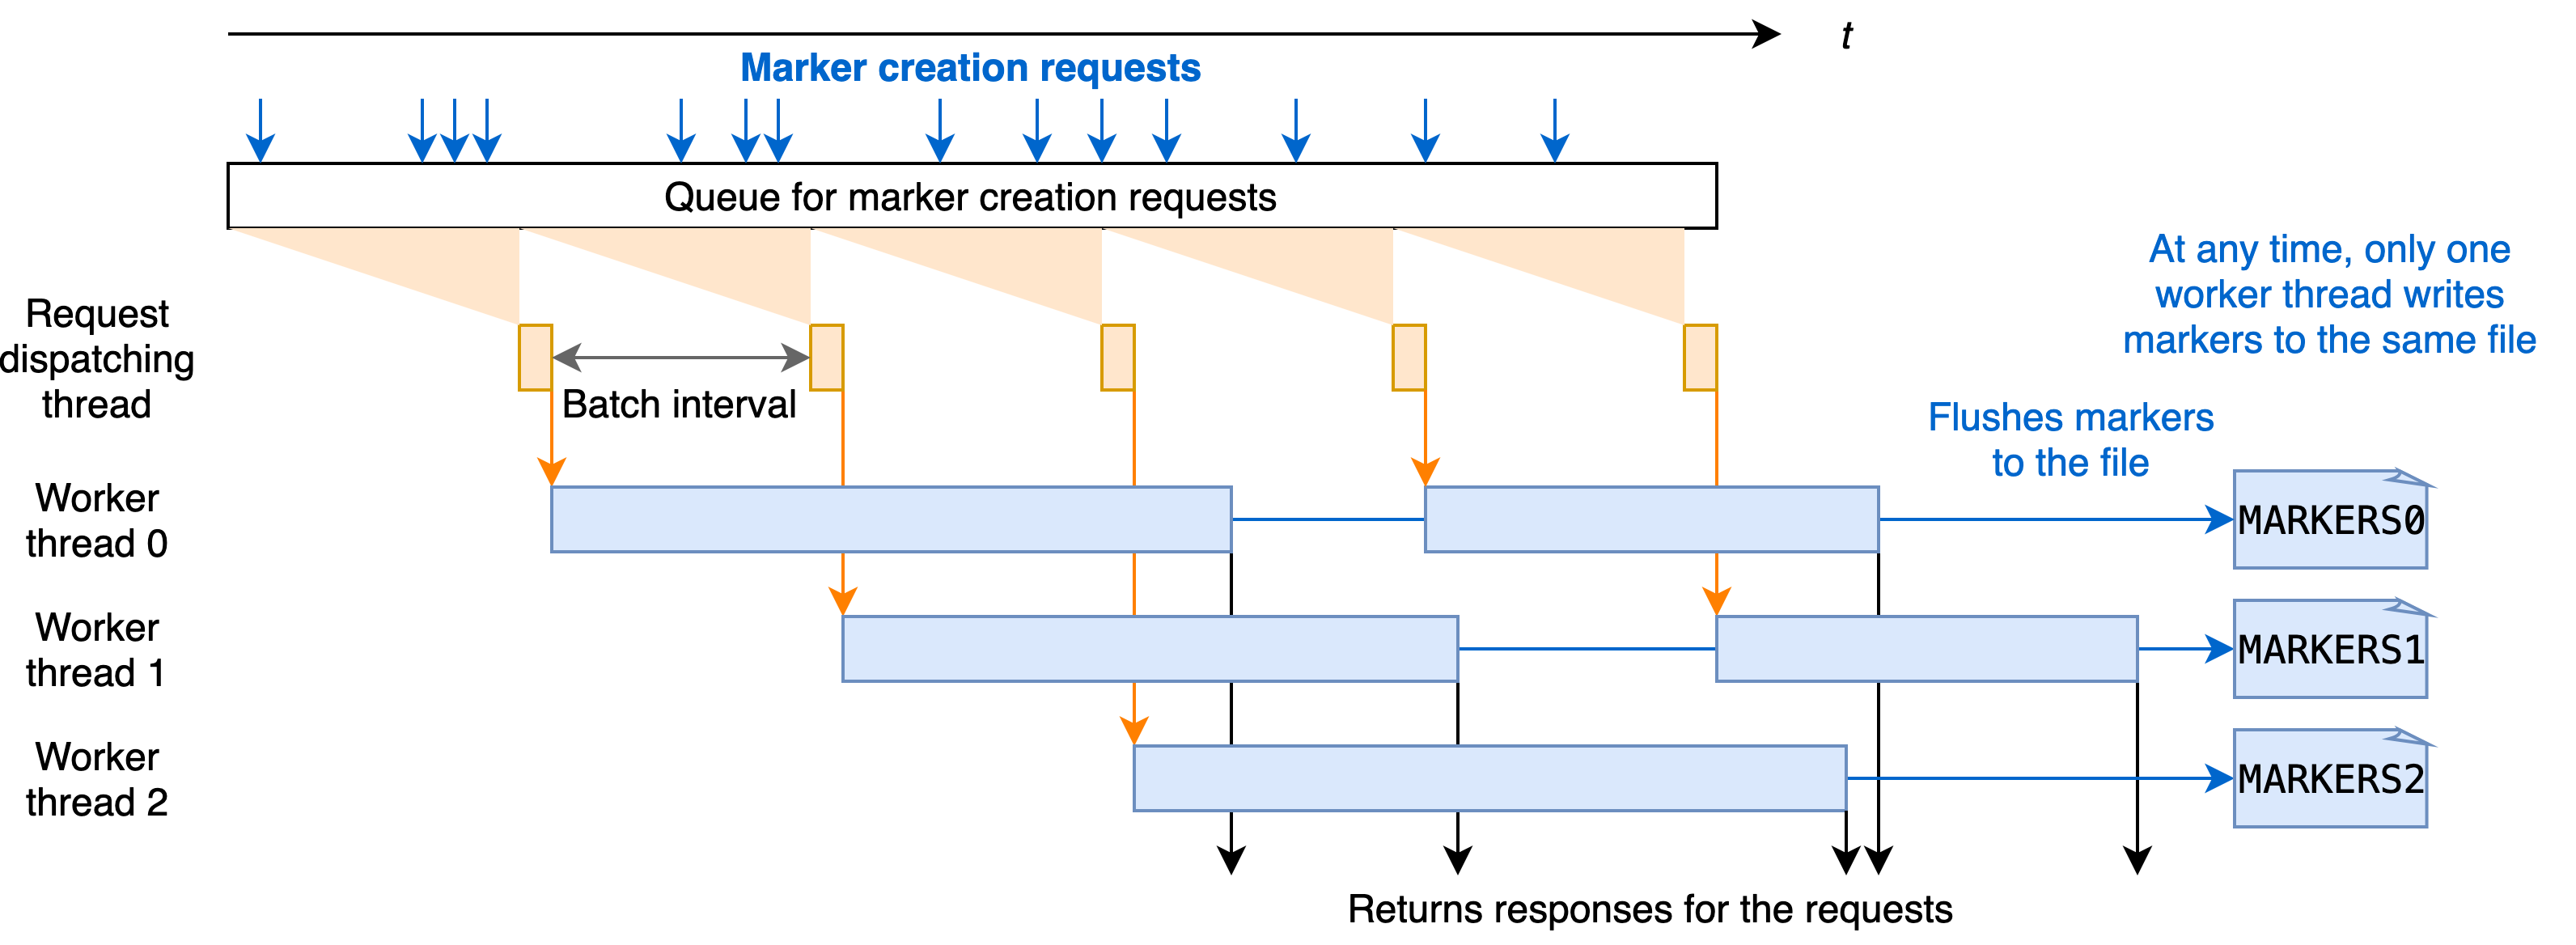 Batched processing of marker creation requests